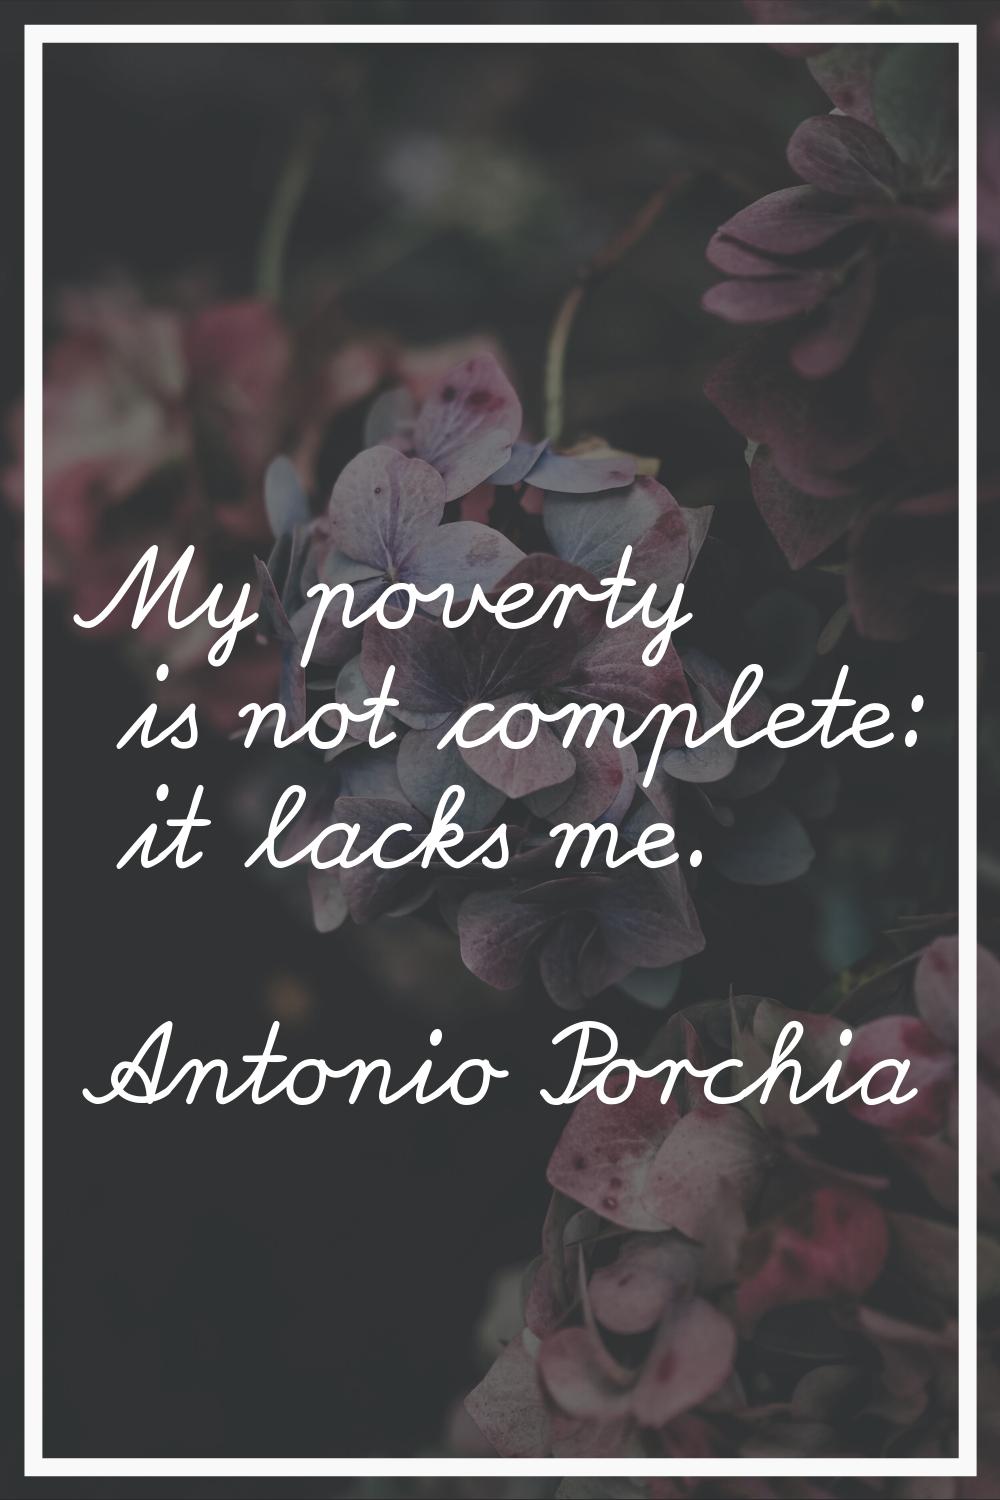 My poverty is not complete: it lacks me.